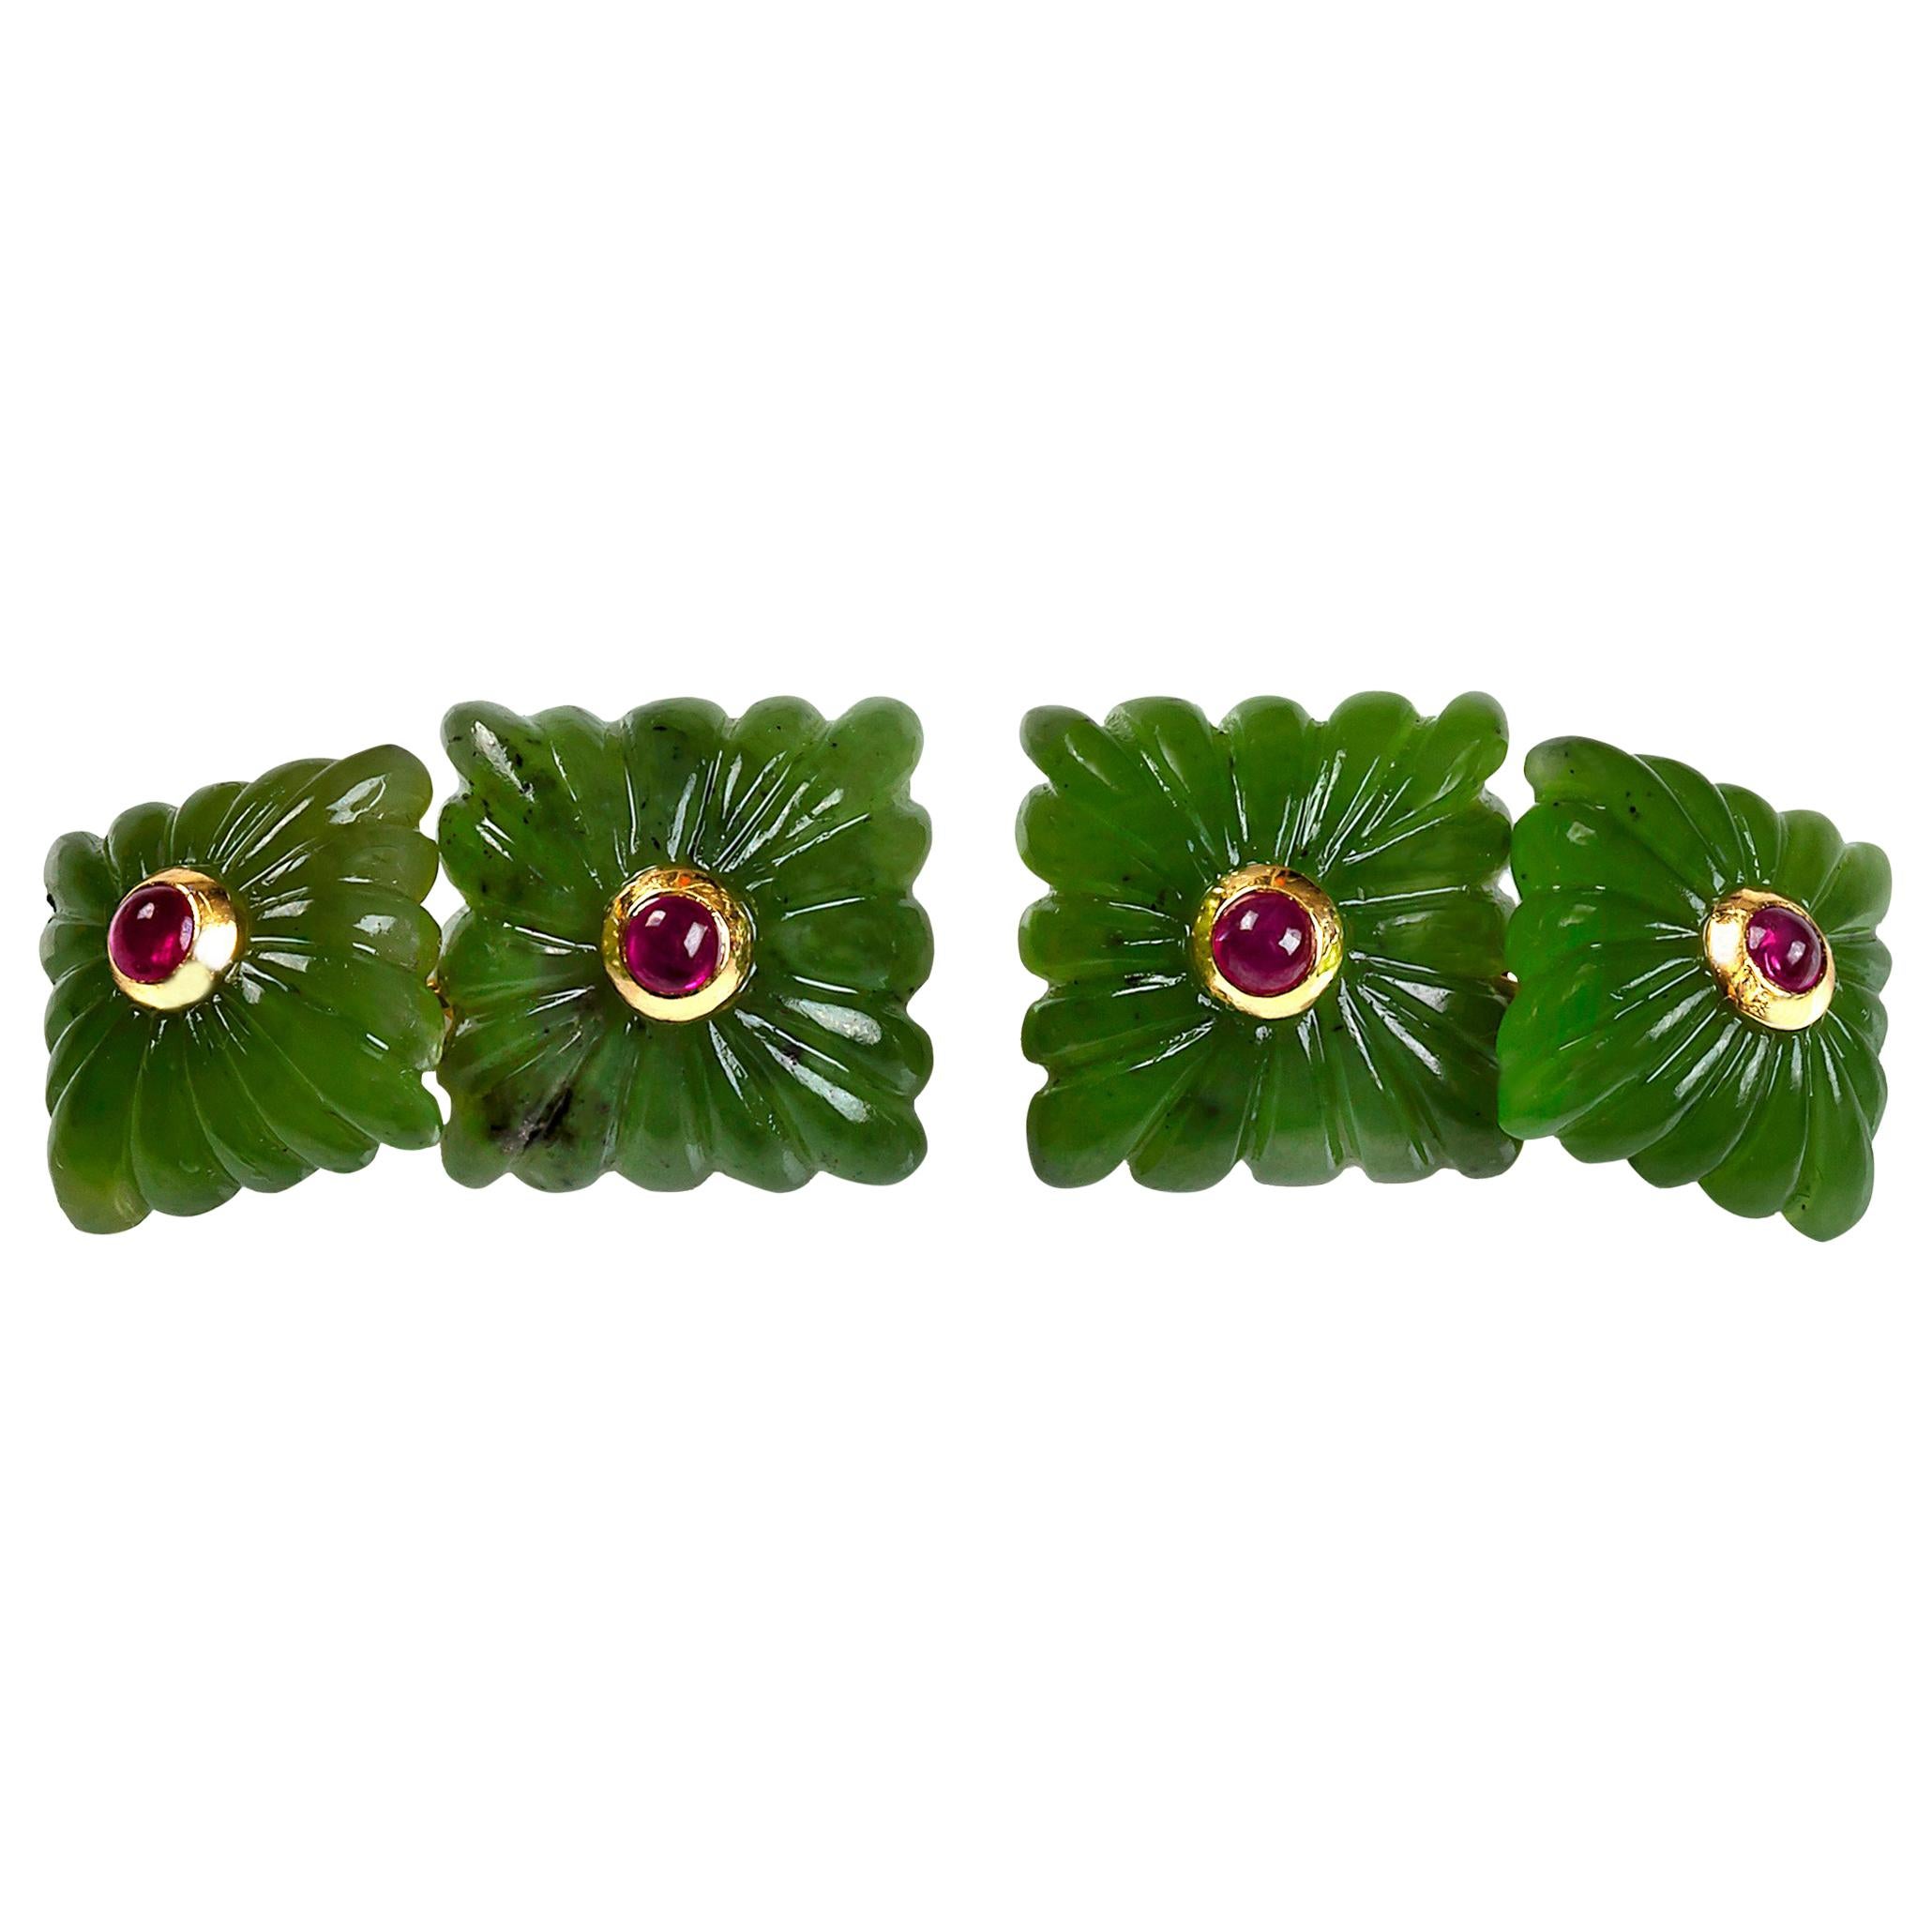 18 Karat Yellow Gold Carved Squared Jade and Rubies Cufflinks